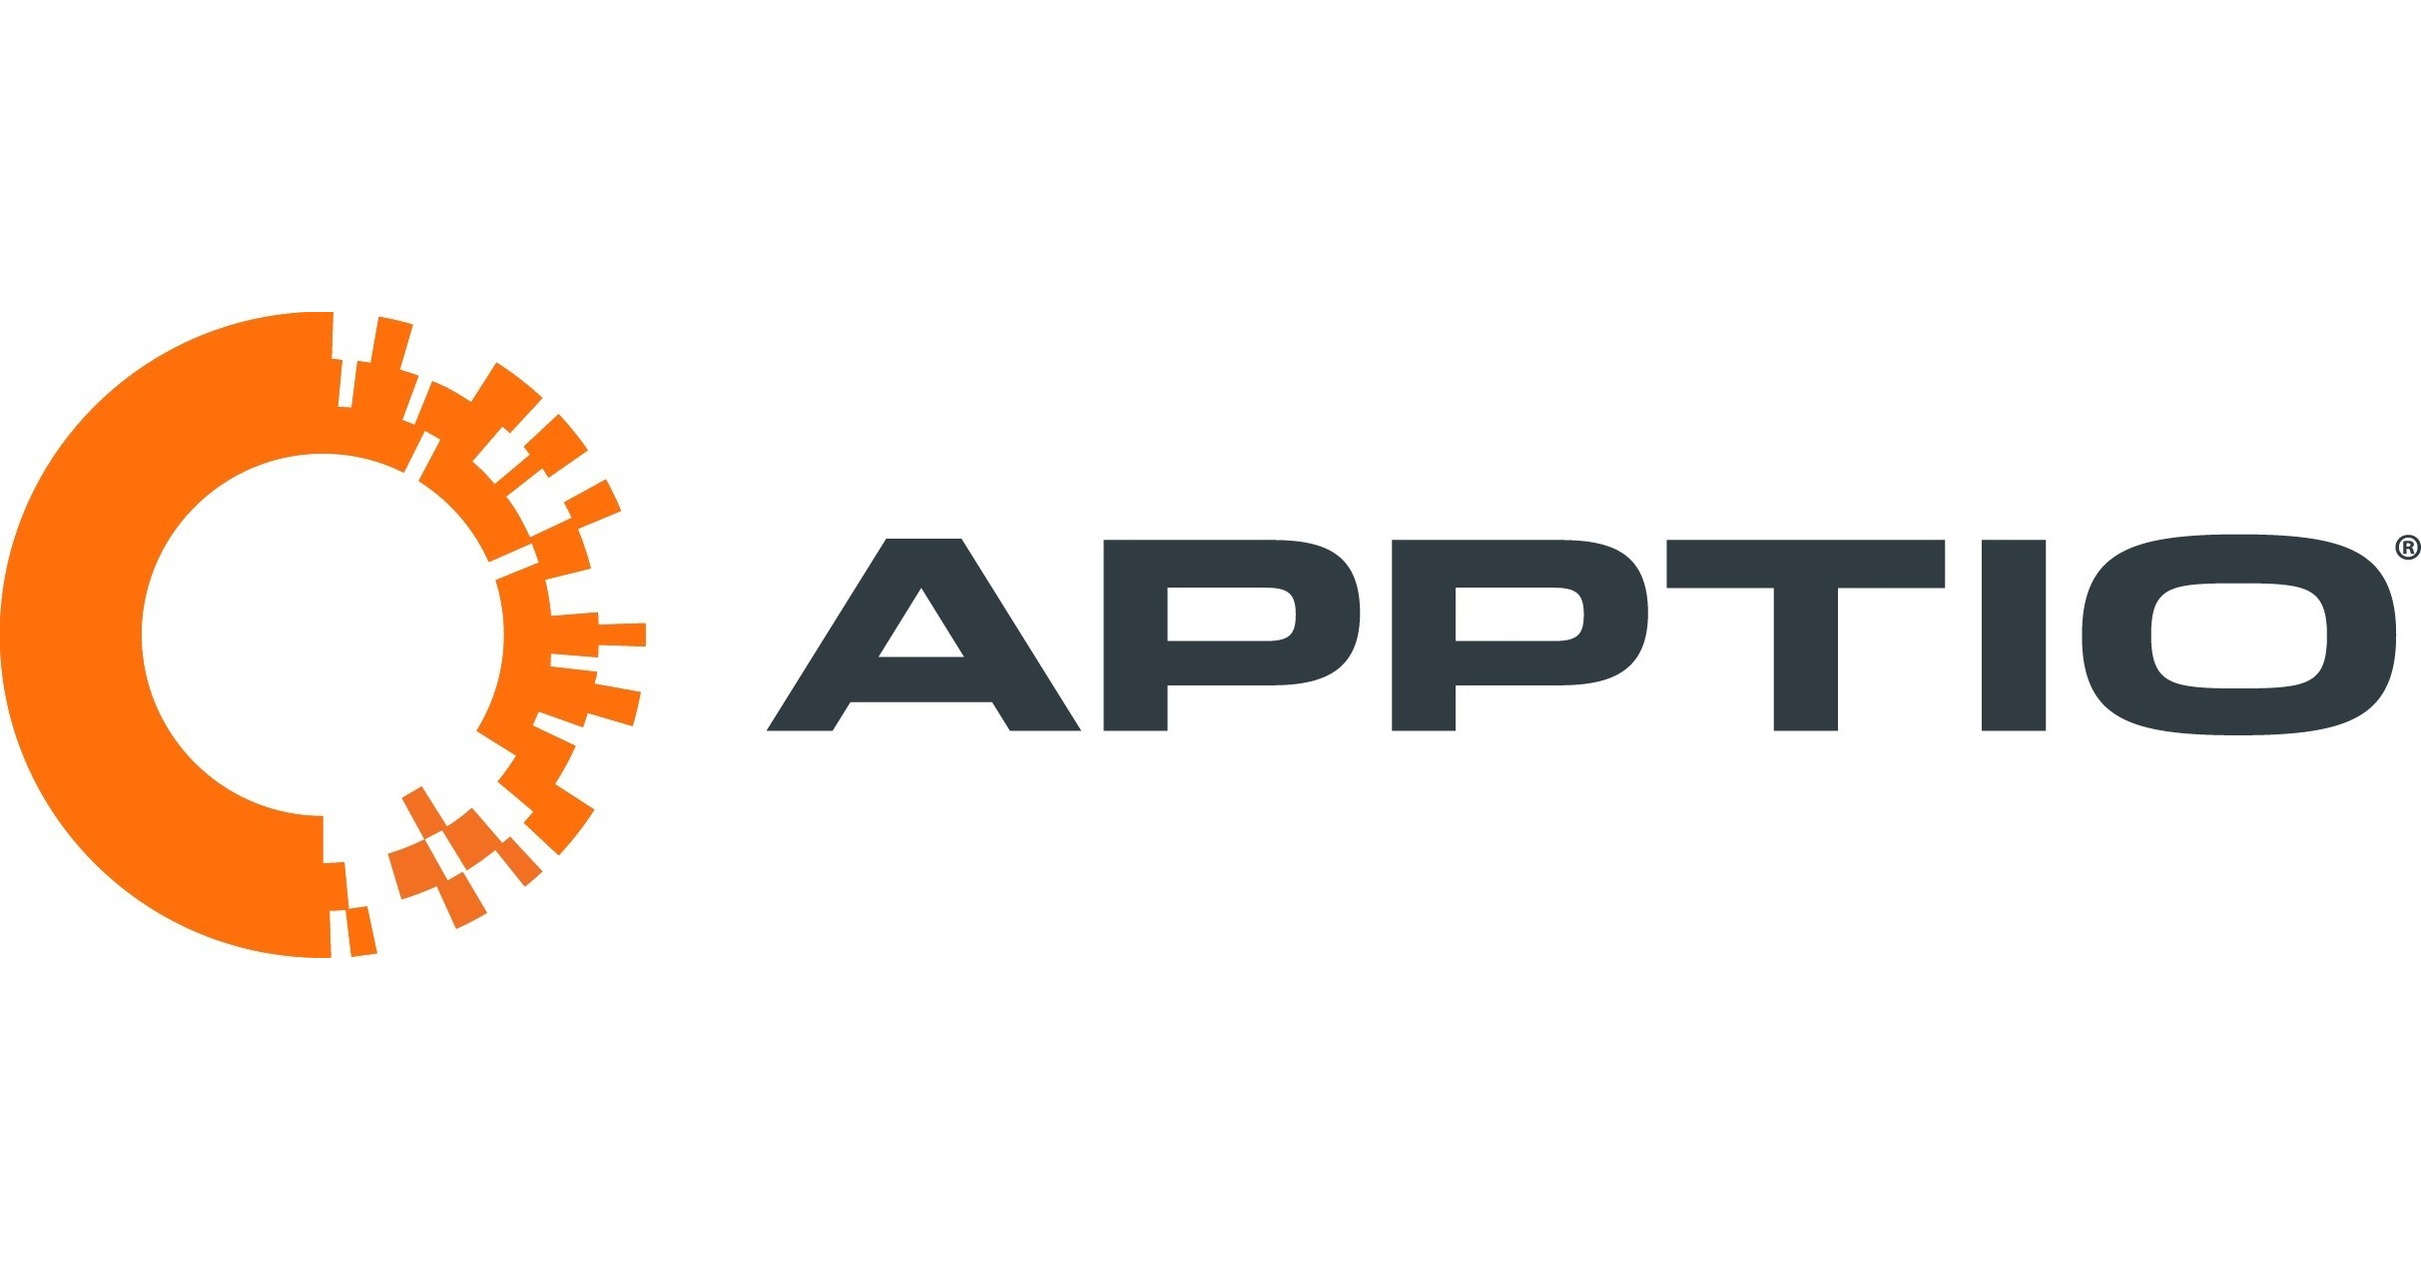 How Is Technology Moving The Business Forward? New Metrics From Apptio Help Business Leaders Find Out - PR Newswire (press release)